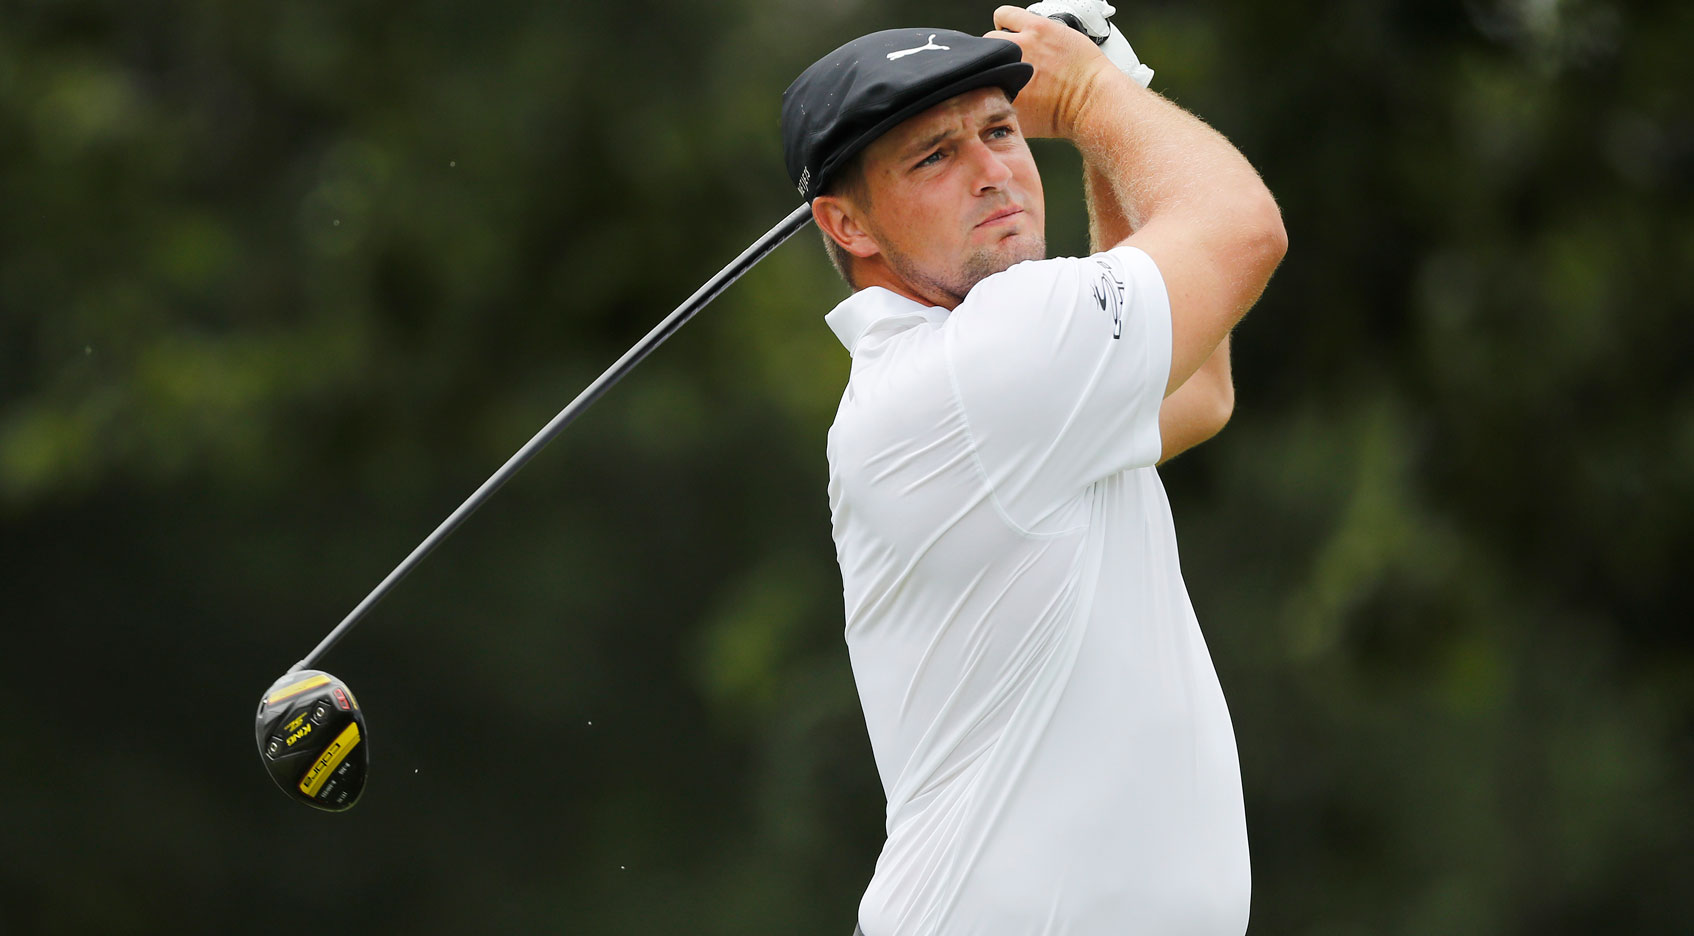 DeChambeau blasts his way to 62 and lead at Shriners Hospitals for Children Open